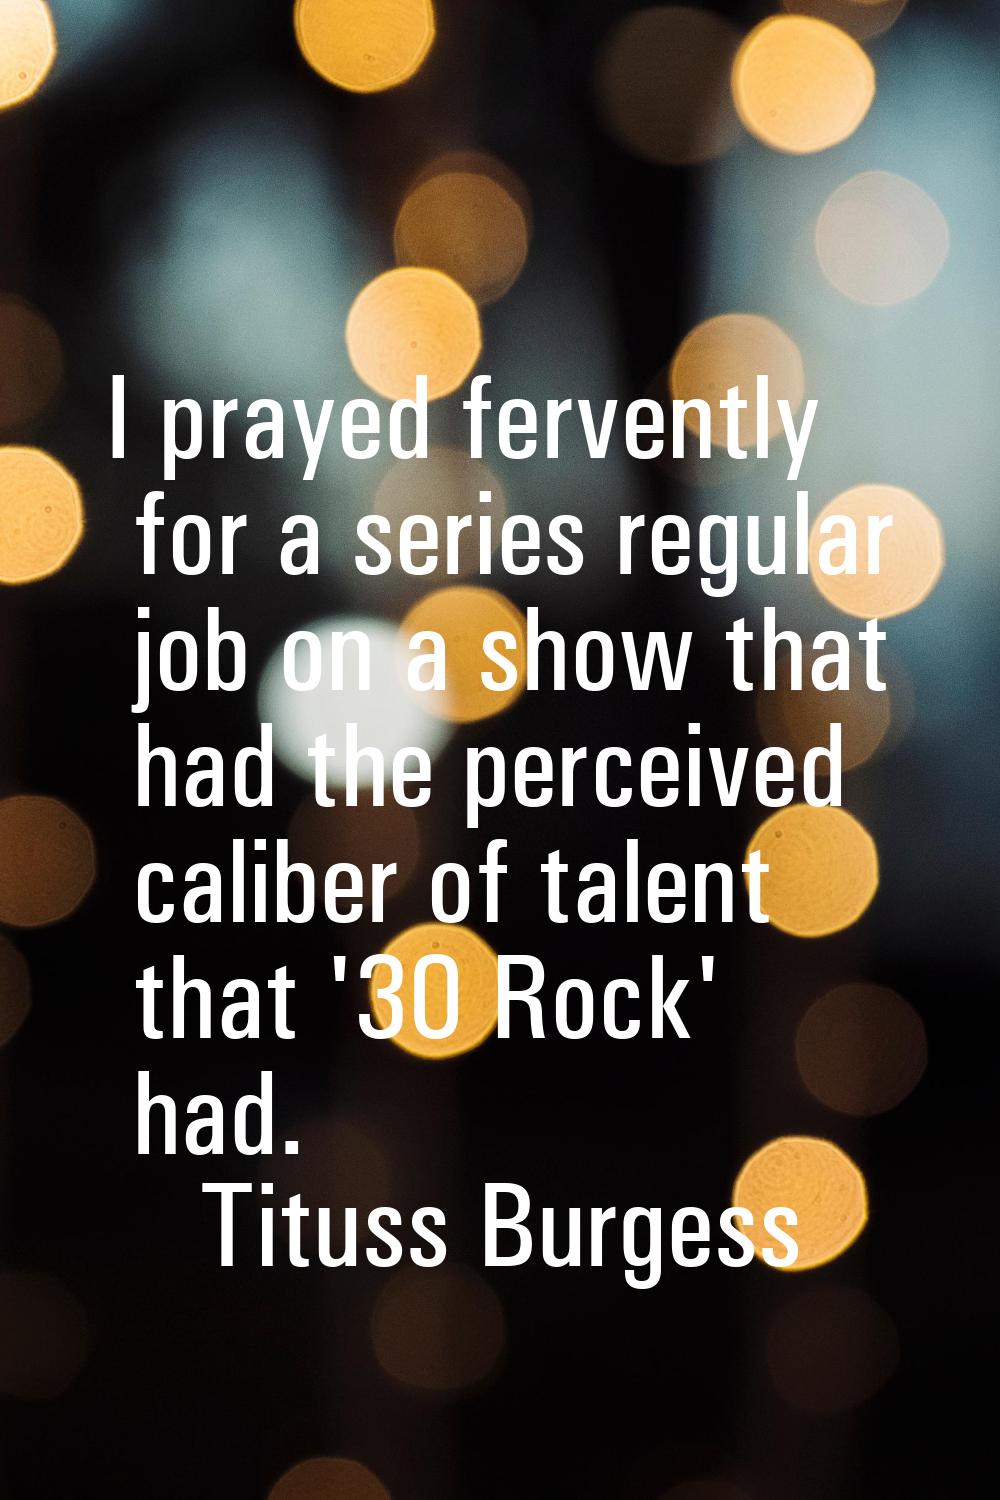 I prayed fervently for a series regular job on a show that had the perceived caliber of talent that